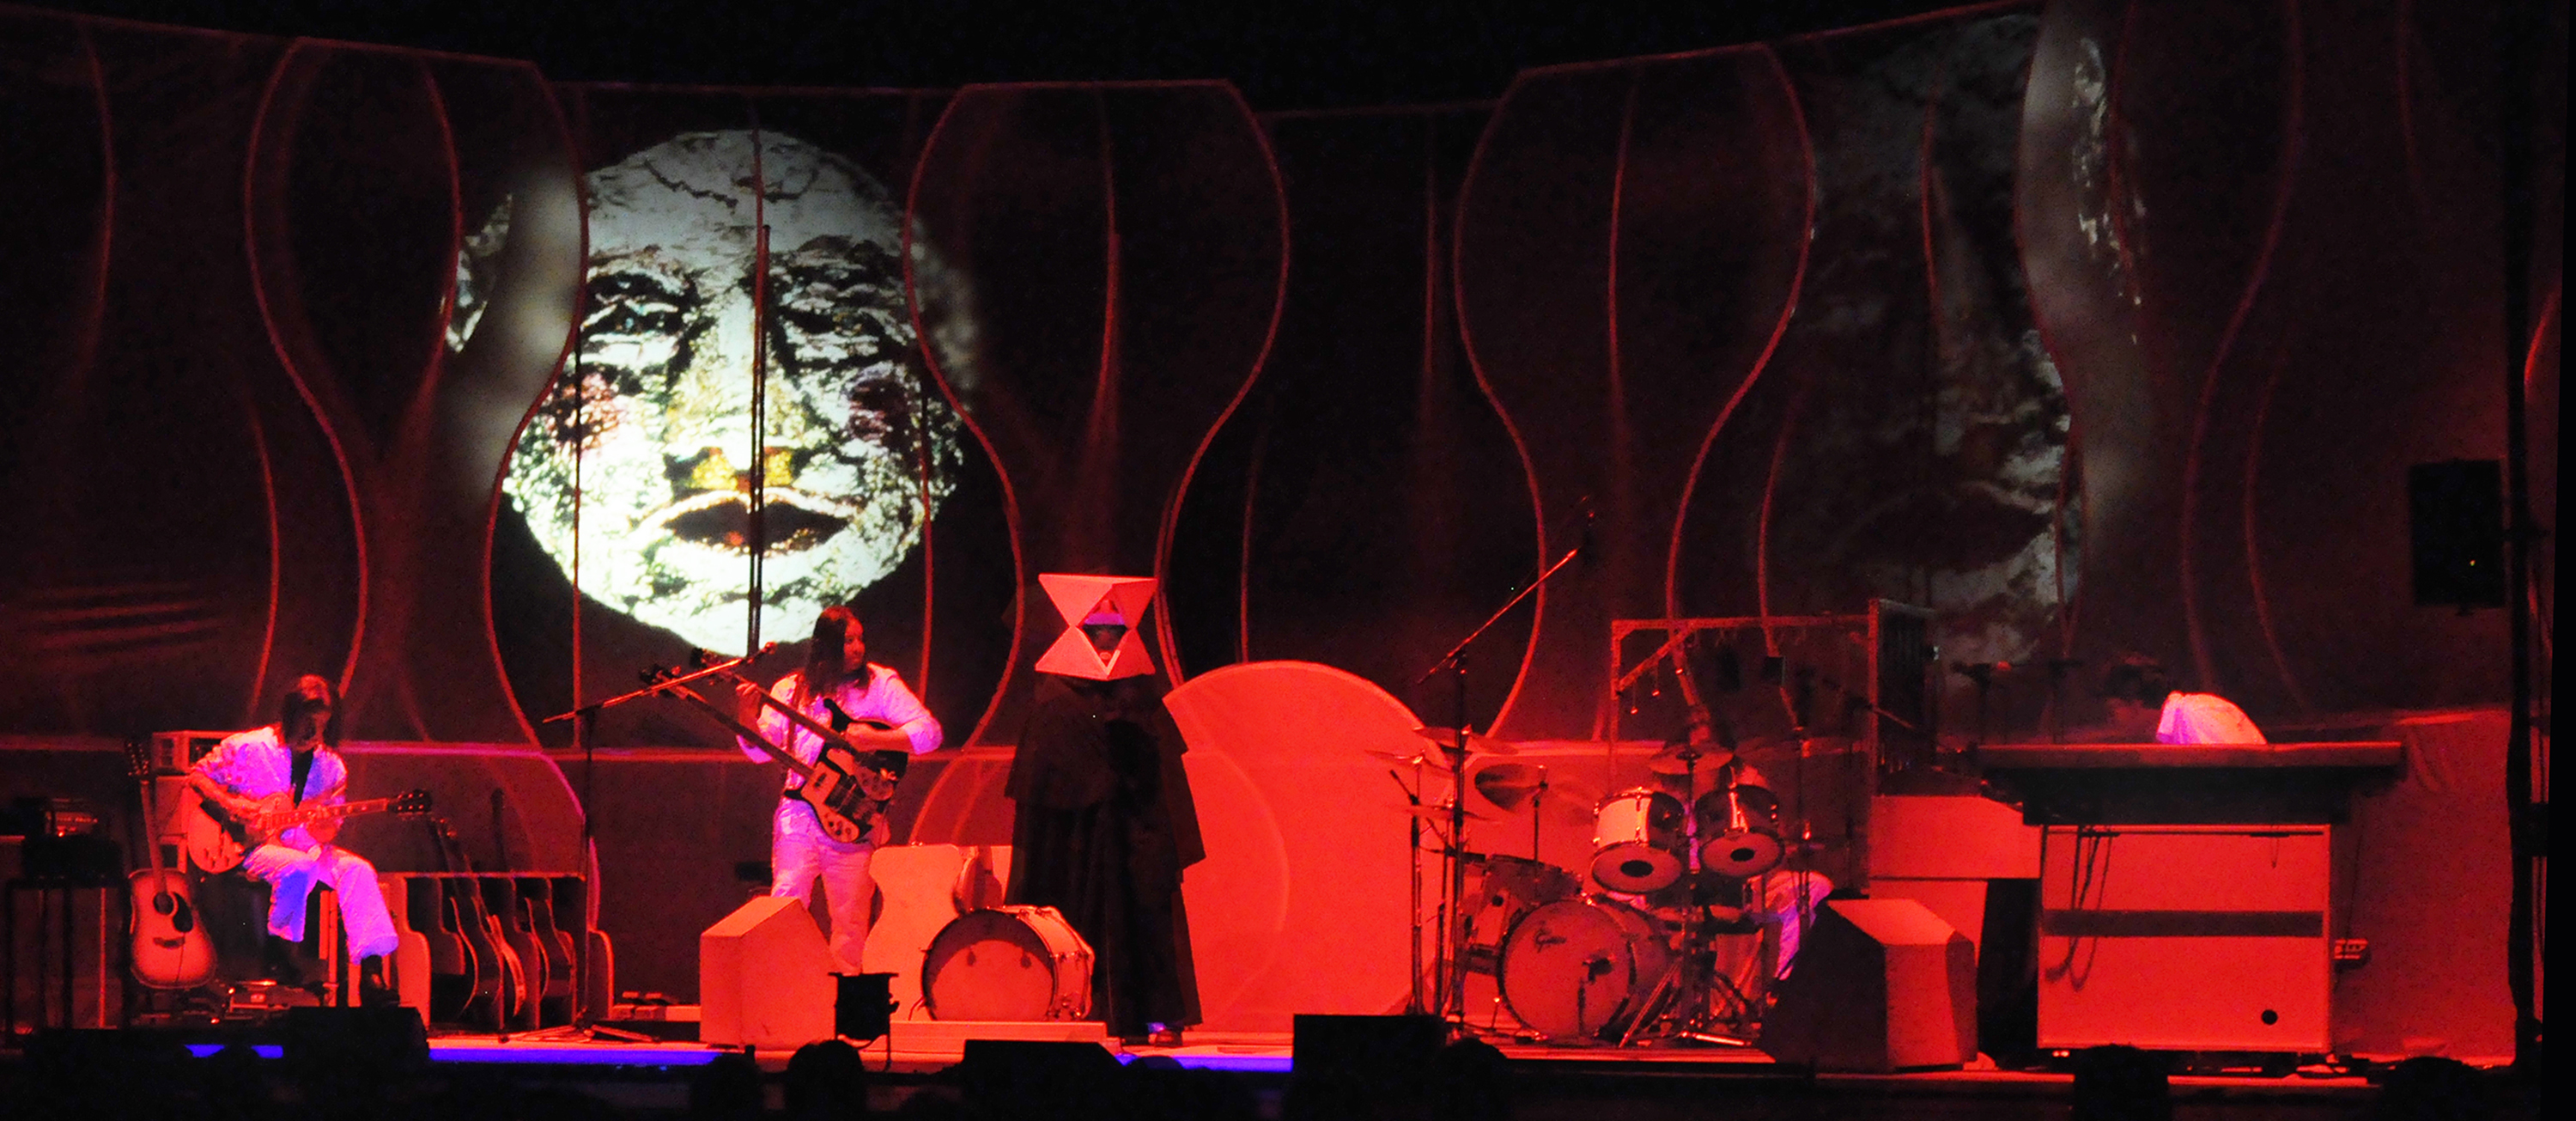 The Musical Box performing "Supper's Ready" with rear projections, in 2013 | Photo: Sam A. Marshall